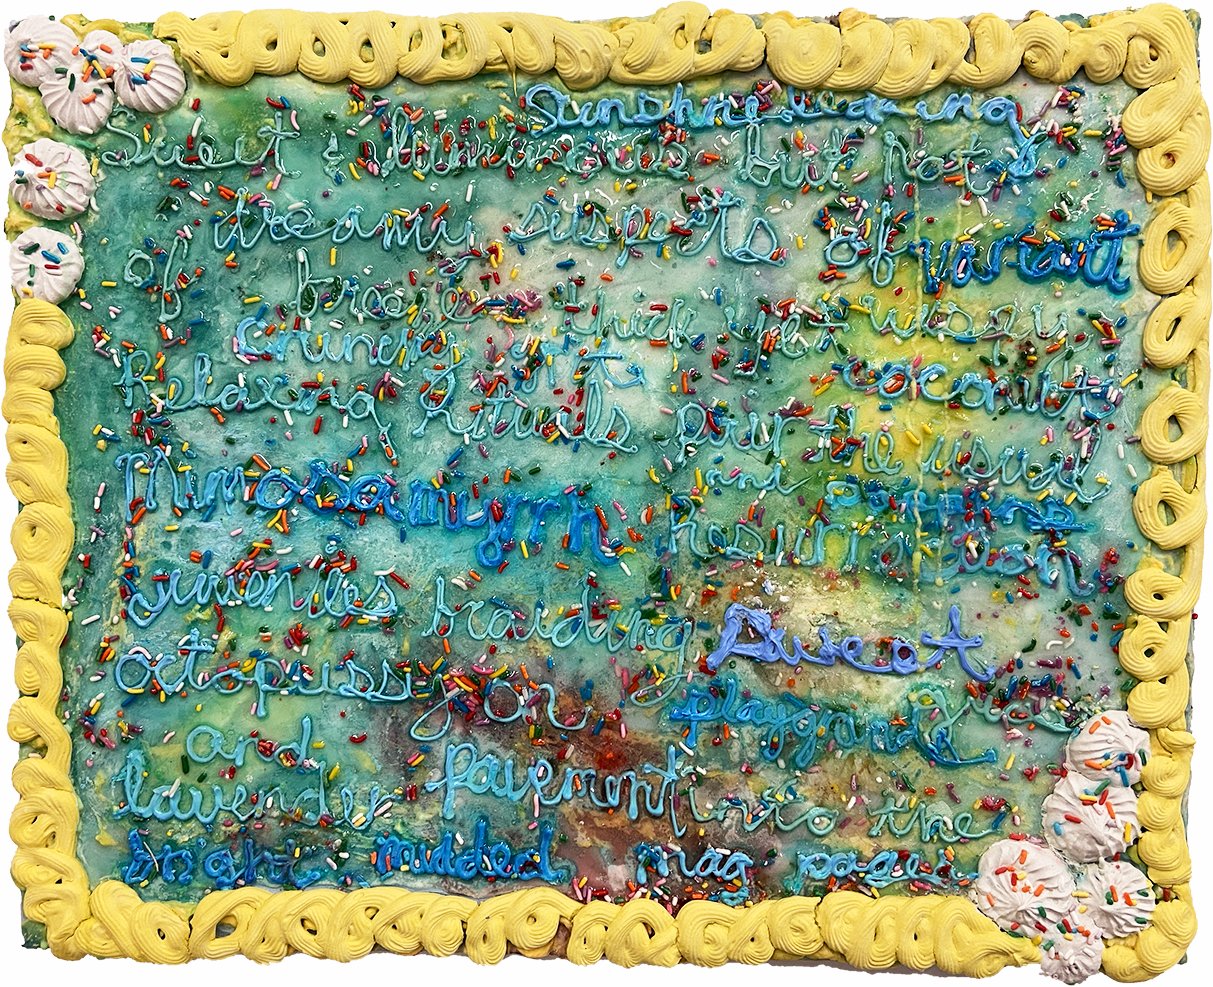  Sydney Shavers,  Untitled (Funfetti) , 2021, acrylic, sugar, resin, food dye, corn syrup, joint compound and artificial flavoring on canvas, 16 x 12 inches 